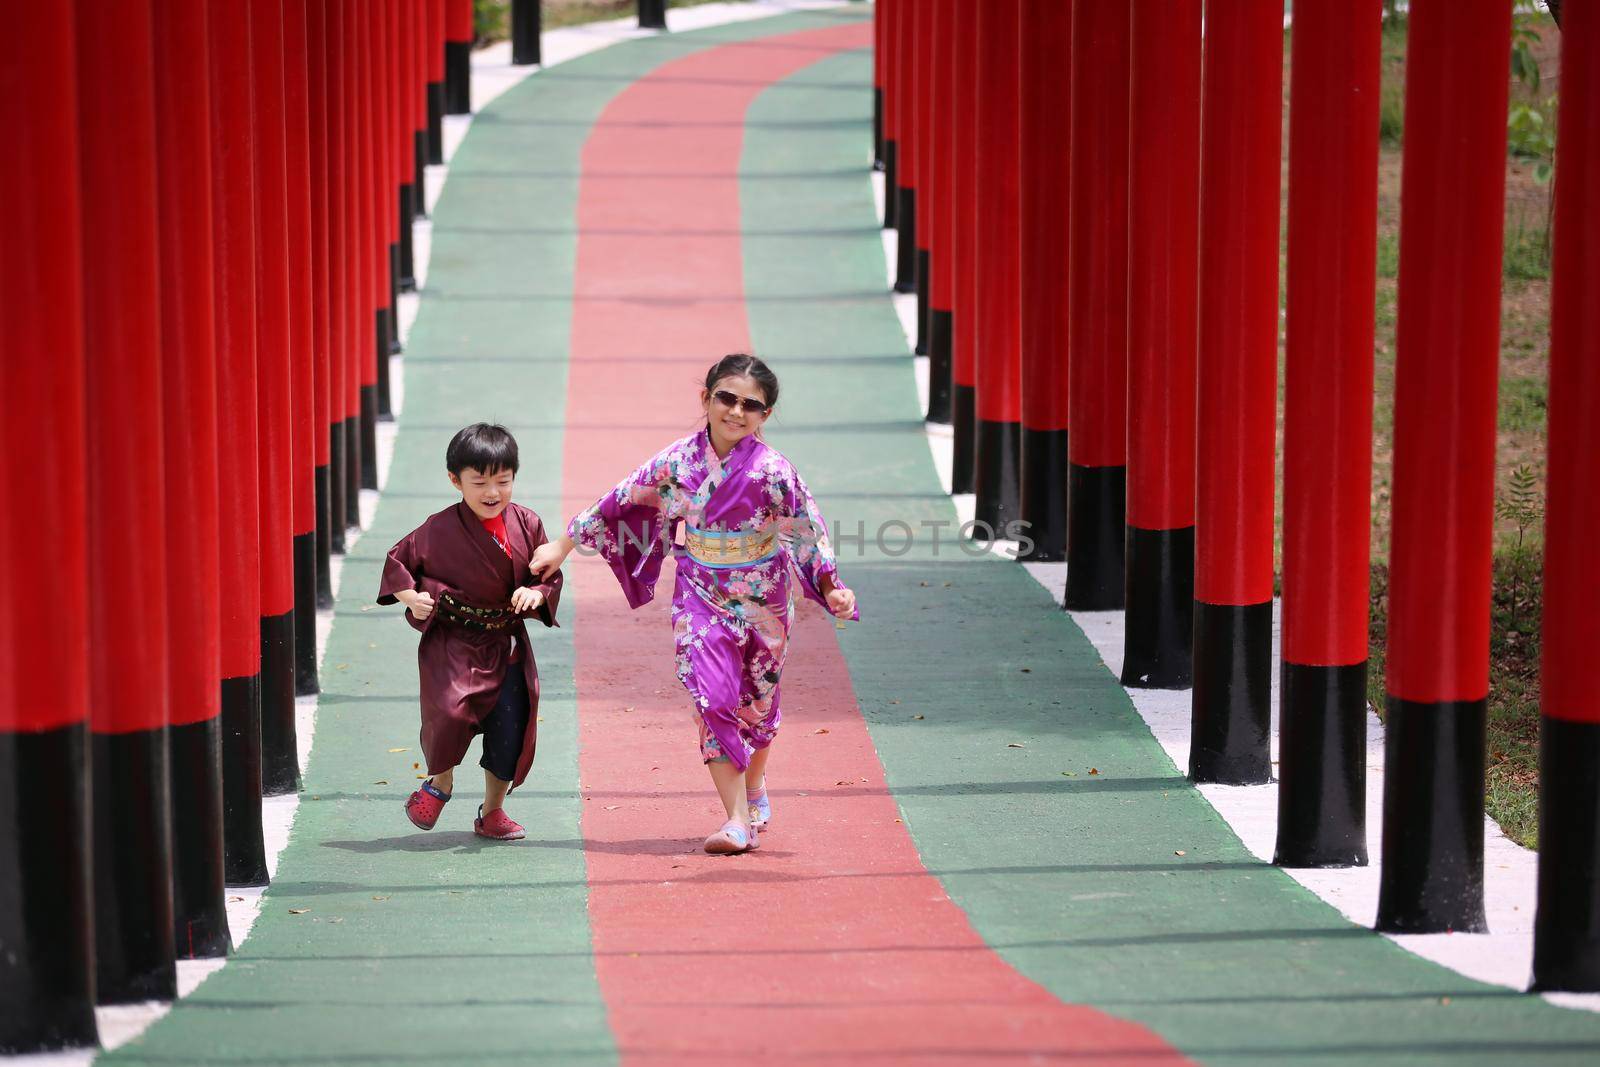 Two kids in kimono walking into at the shrine red gate, in Japanese garden.